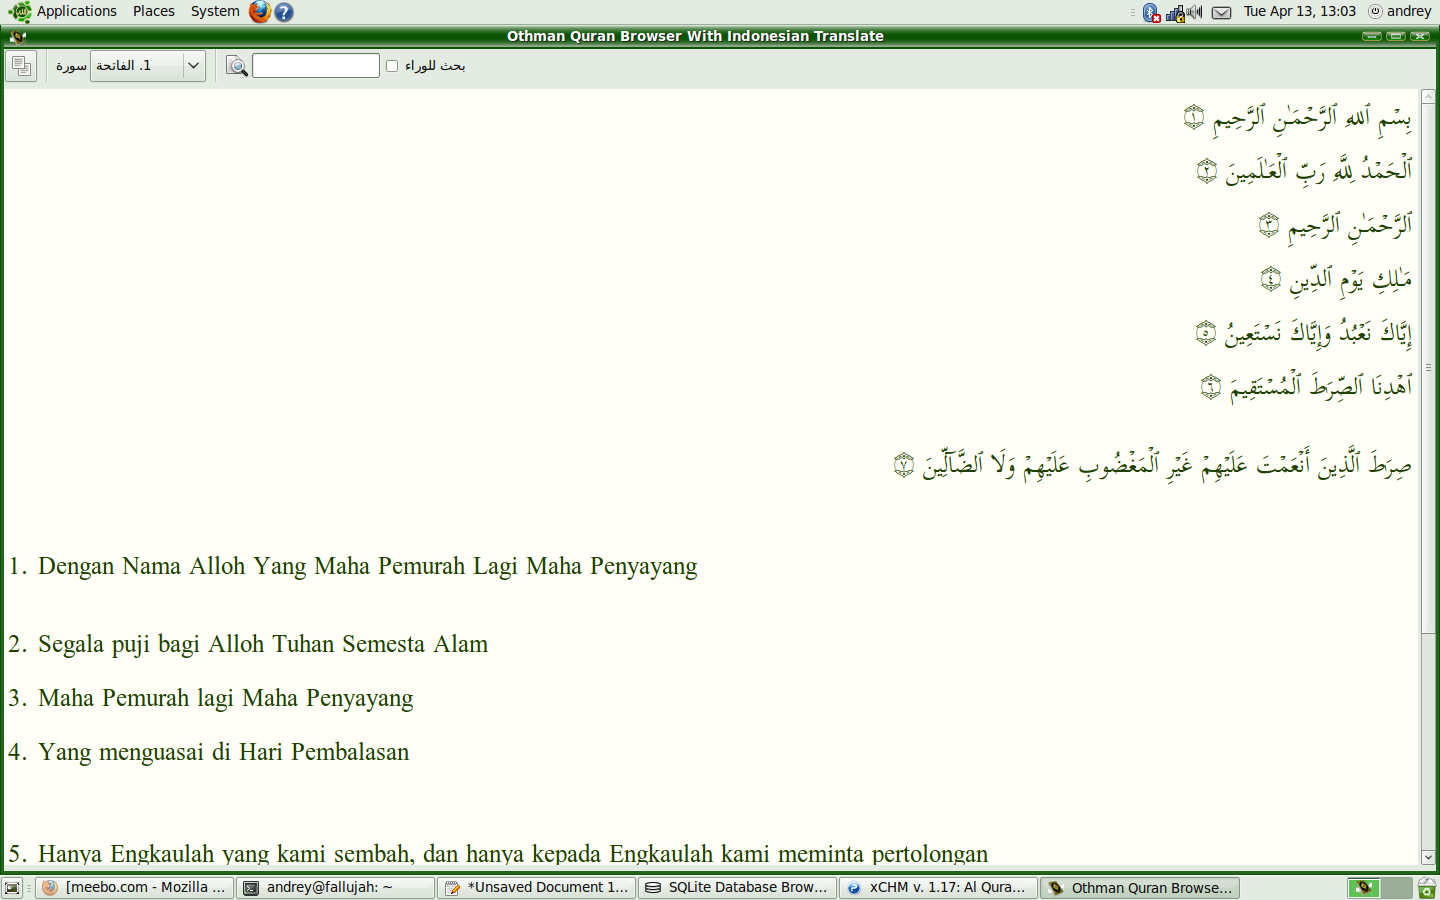 Othman Quran Browser With Indonesian Translation